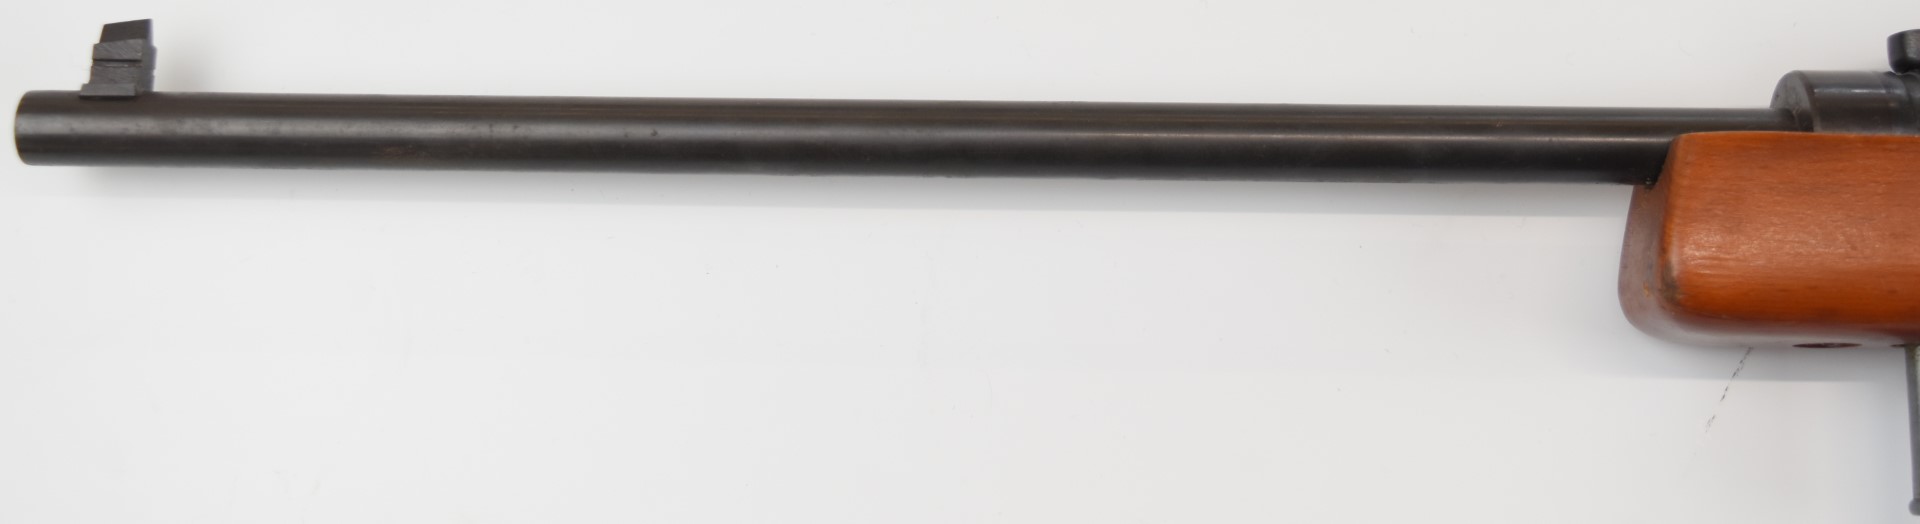 Haenel Model 310 lever-action 4.4mm calibre air rifle with semi-pistol grip, adjustable sights and - Image 15 of 19